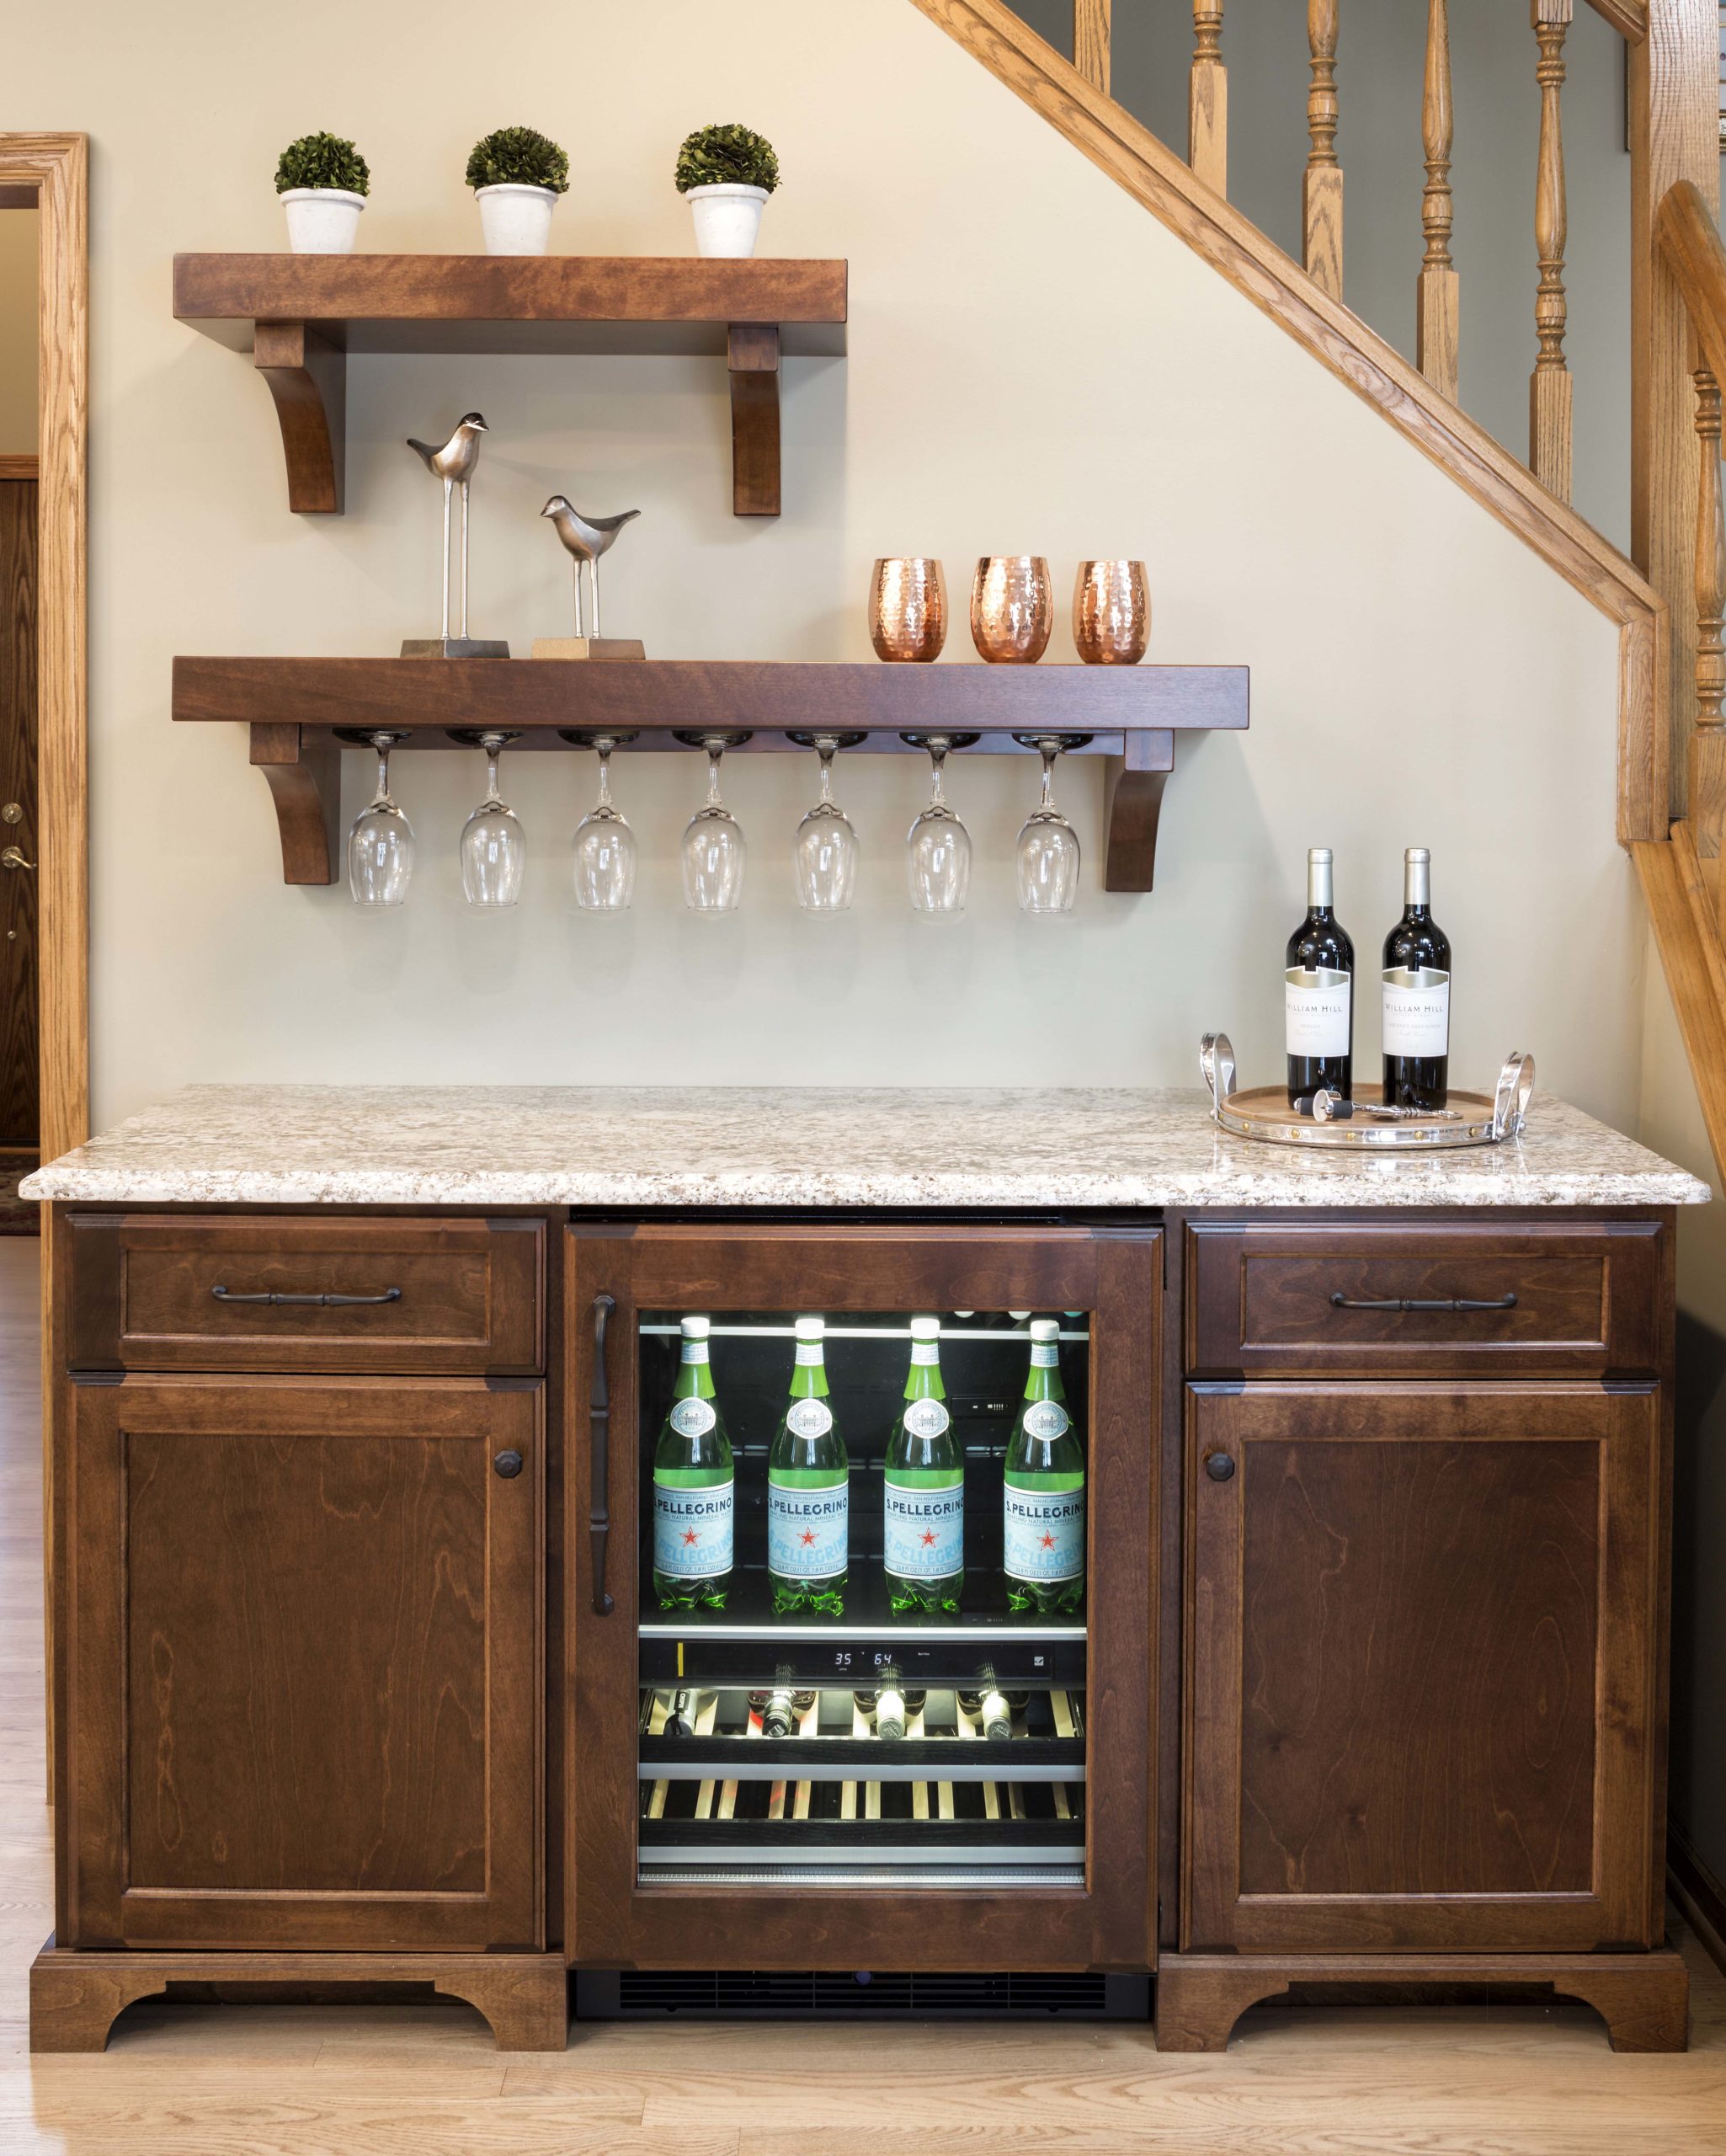 Wine bar with cupboards, small refrigerator, marble countertop and wooden shelf on wall with hanging long stem glasses.